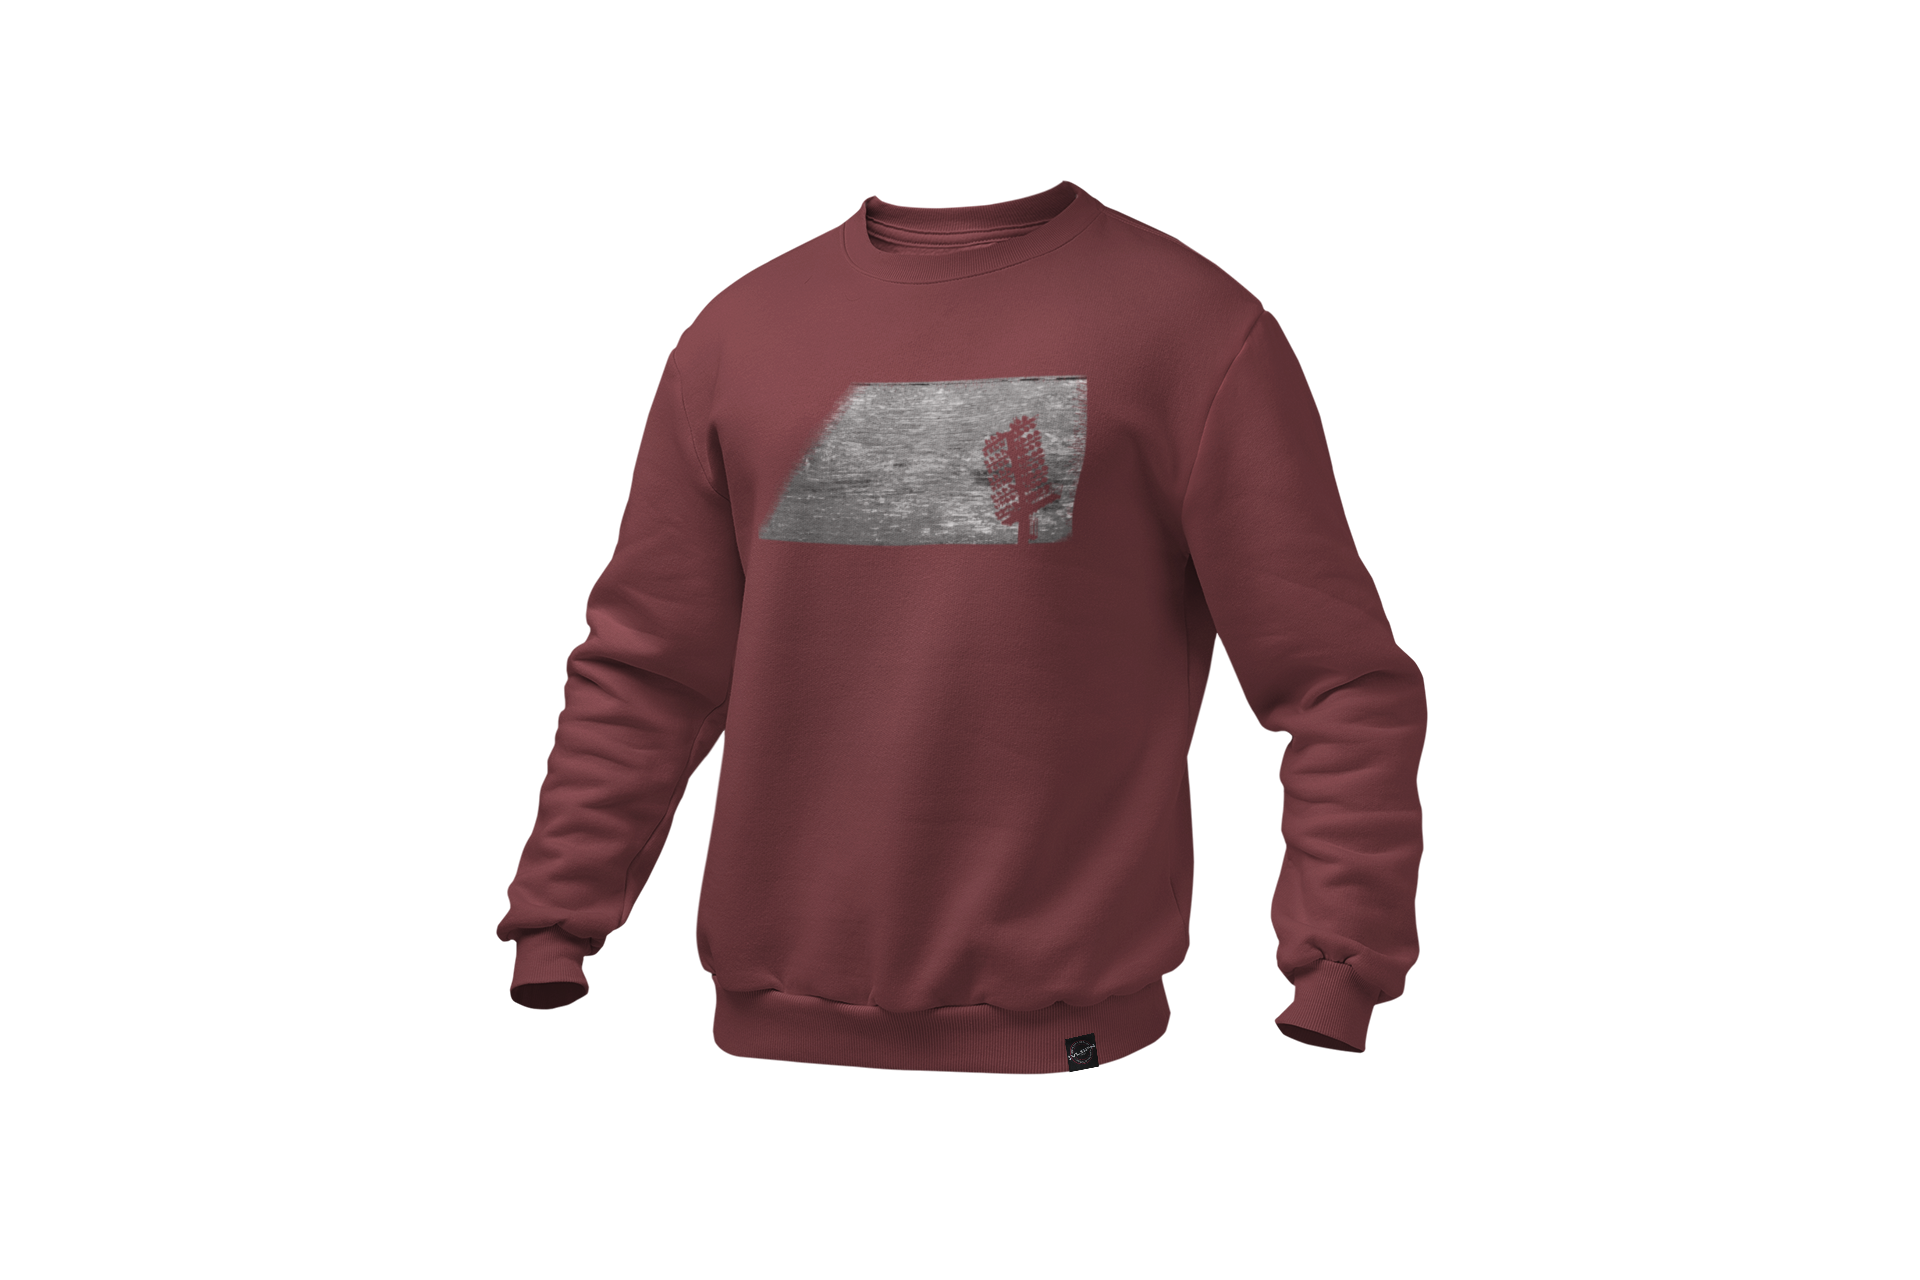 mockup-of-a-ghosted-crewneck-sweatshirt-over-a-solid-background-26960 (20).png